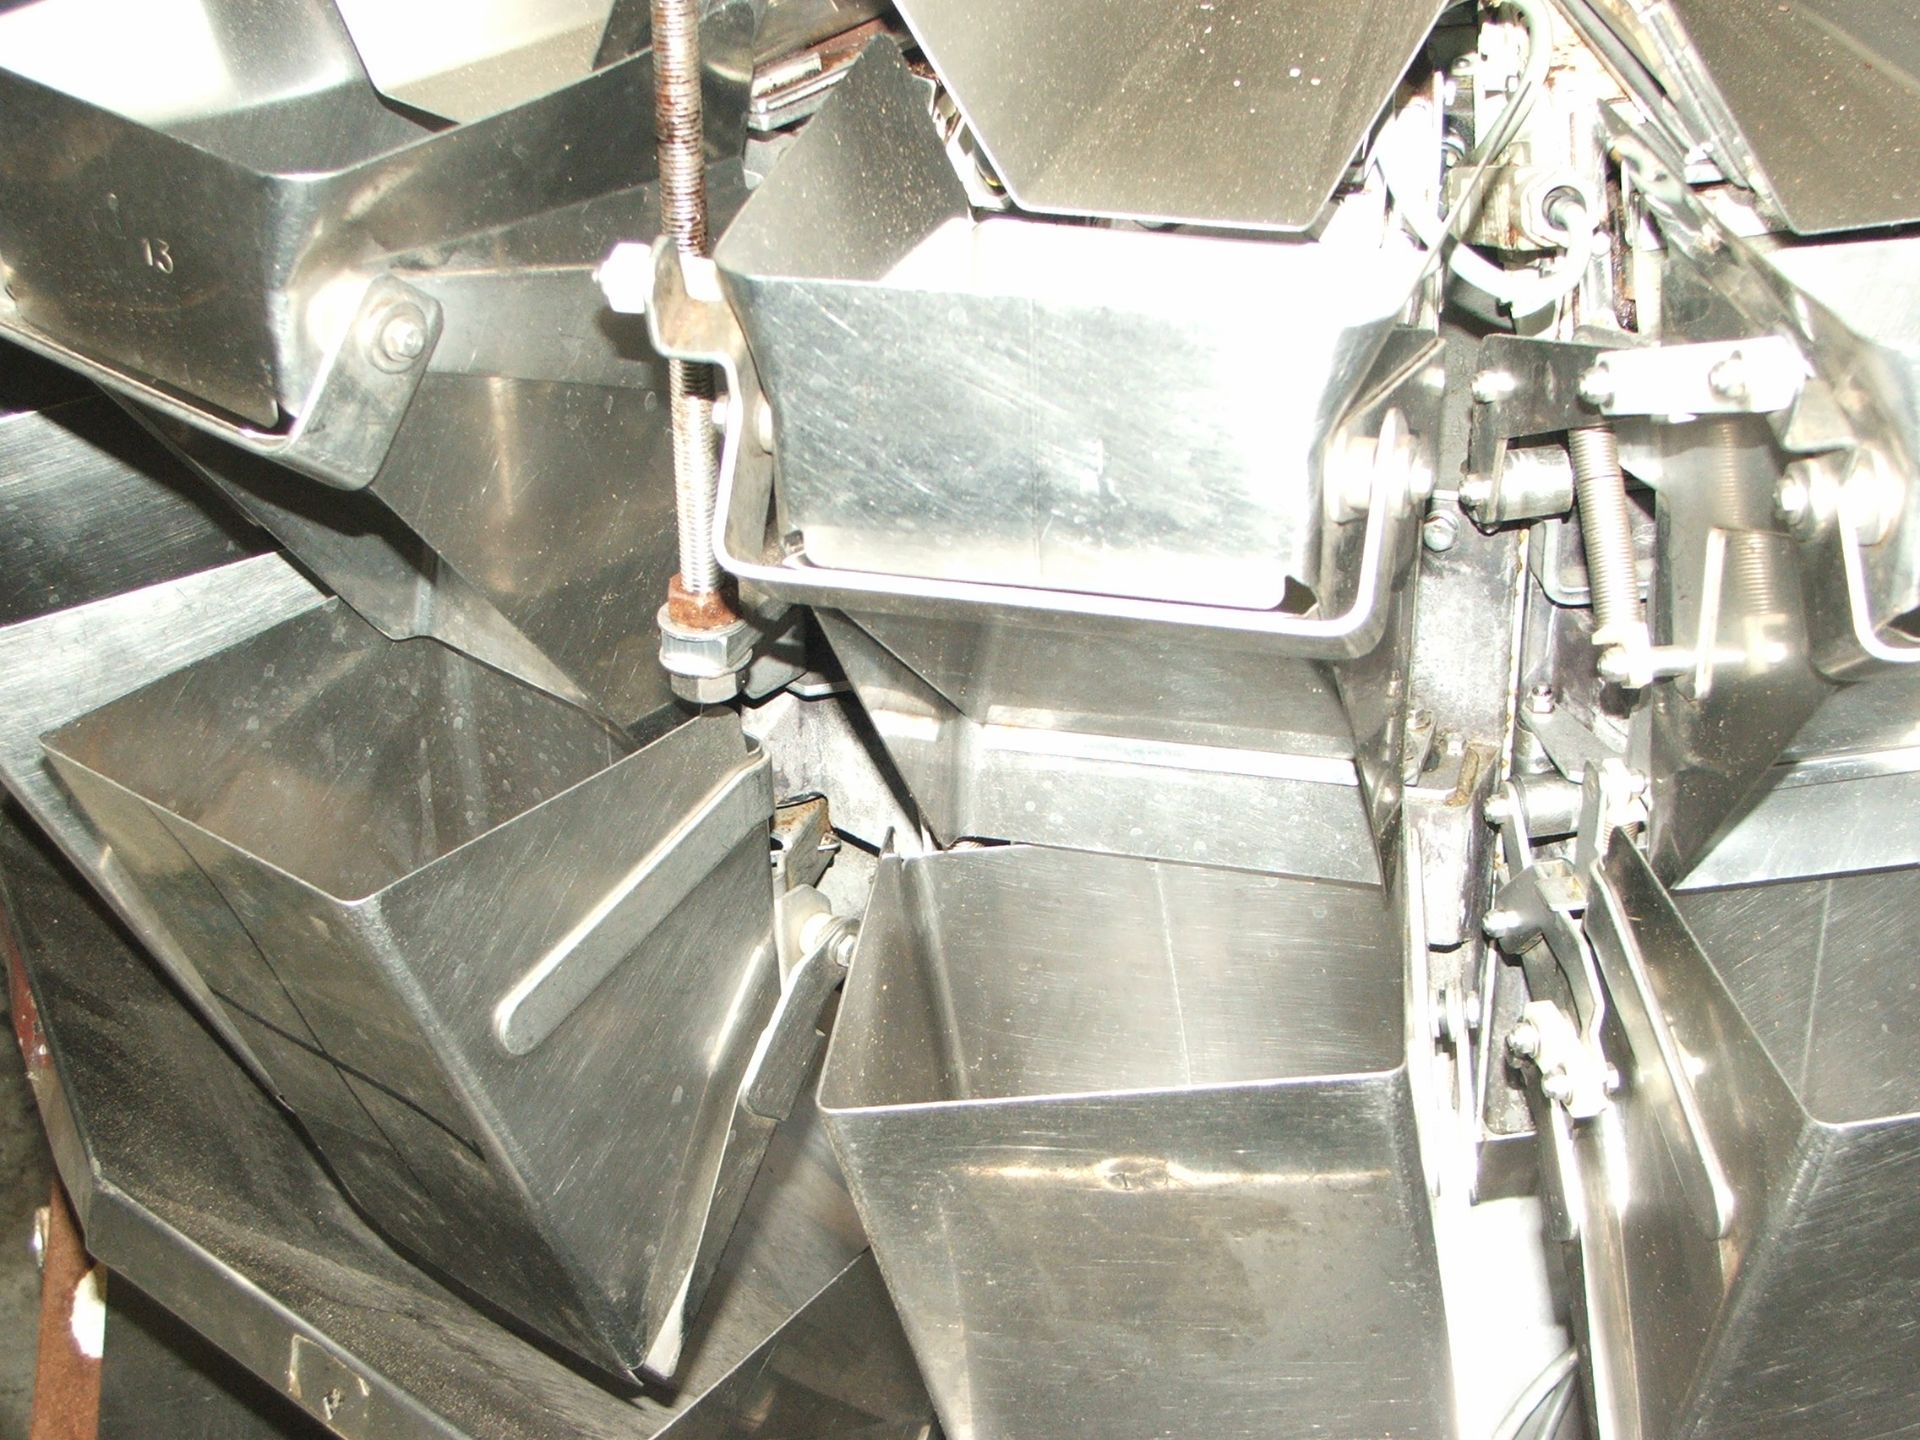 ISHIDA CCW-S-211 14 STATION SMOOTH POCKET MULTI WEIGHER USED FOR SNACK FOOD PRDUCT LIFT OUT £25.00 - Image 2 of 2